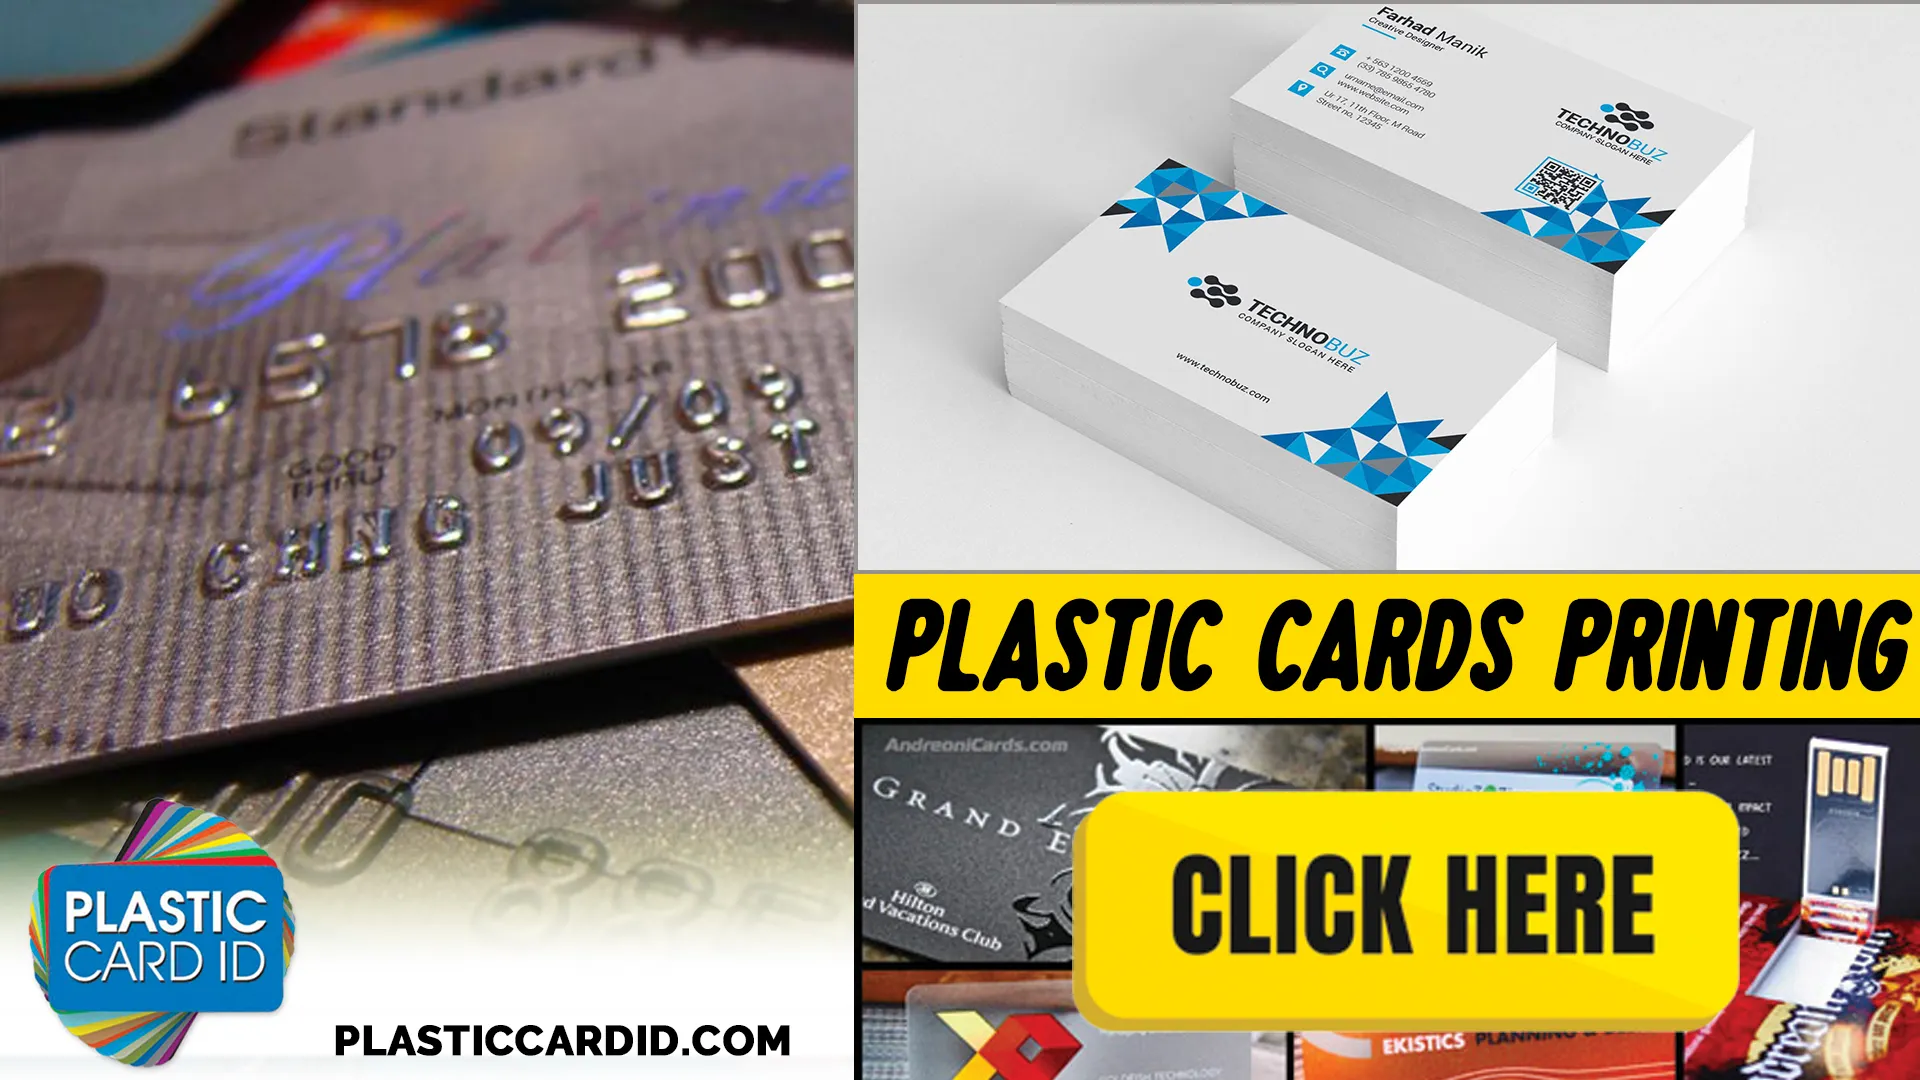 Why Plastic Card ID
? The Difference is Clear